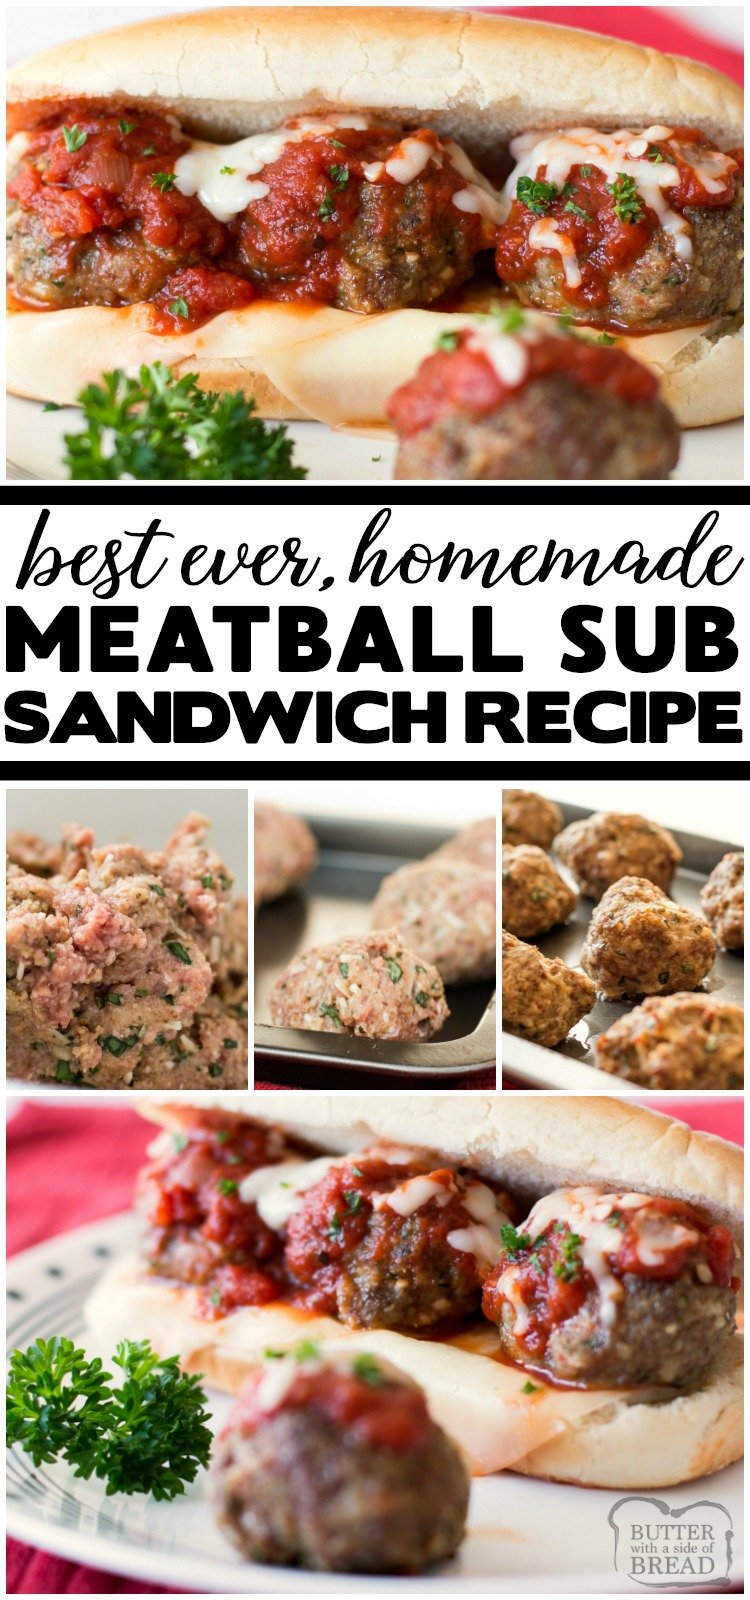 Meatball Sub recipe with flavorful, baked homemade meatballs, then assembled with 2 types of cheese, marinara sauce all on a crusty french roll. Perfect meatball sub recipe for dinner or lunch!  #beef #meatball #sub #sandwich #lunch #dinner #protein #food #recipe from BUTTER WITH A SIDE OF BREAD